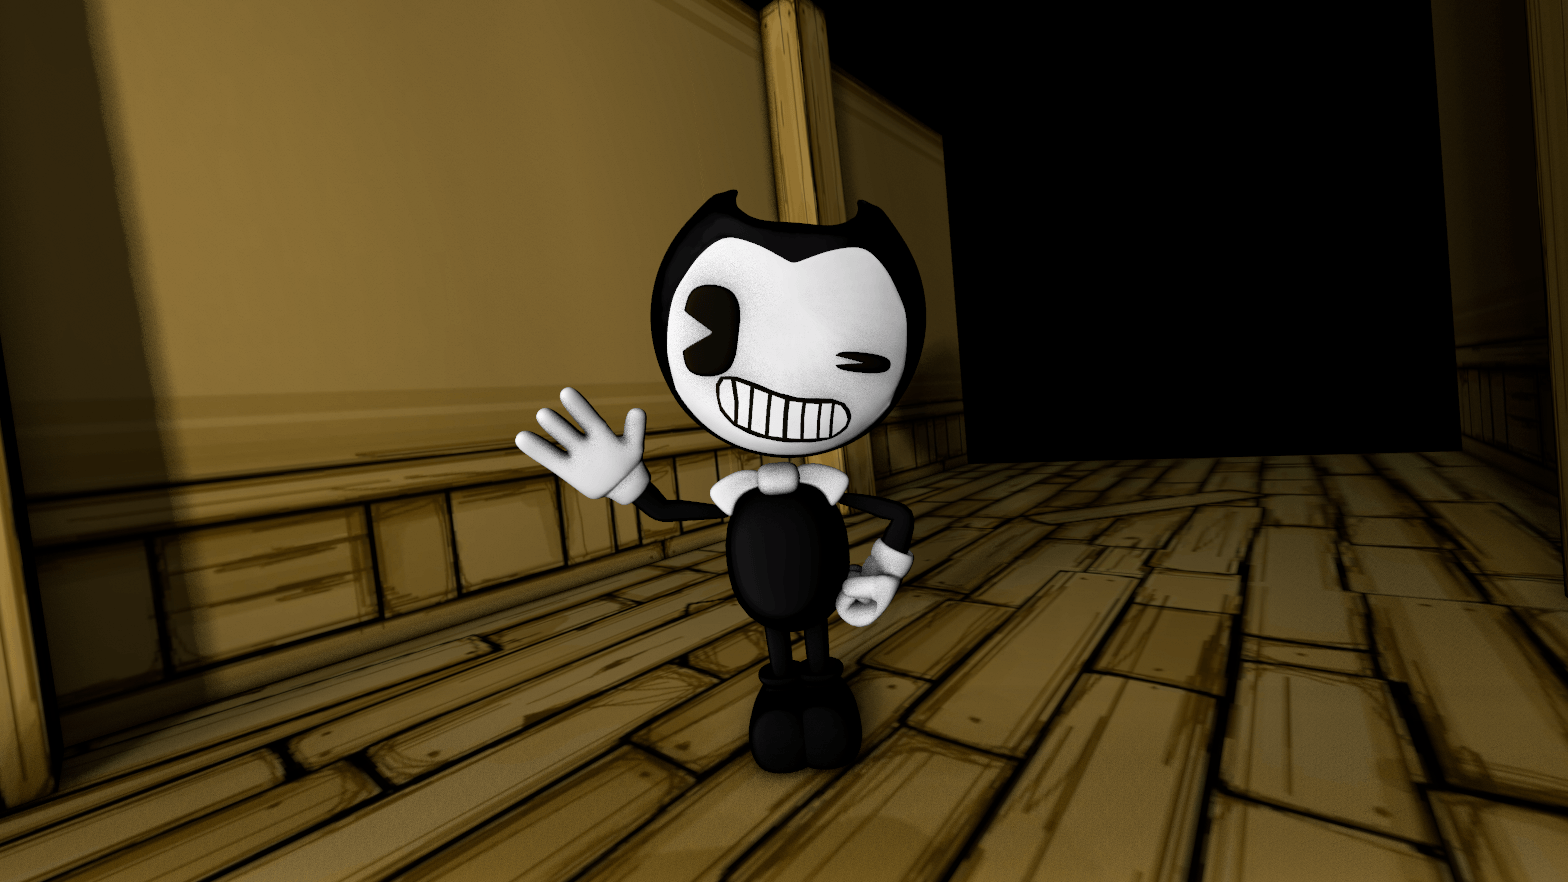 Bendy And The Ink Machine Download